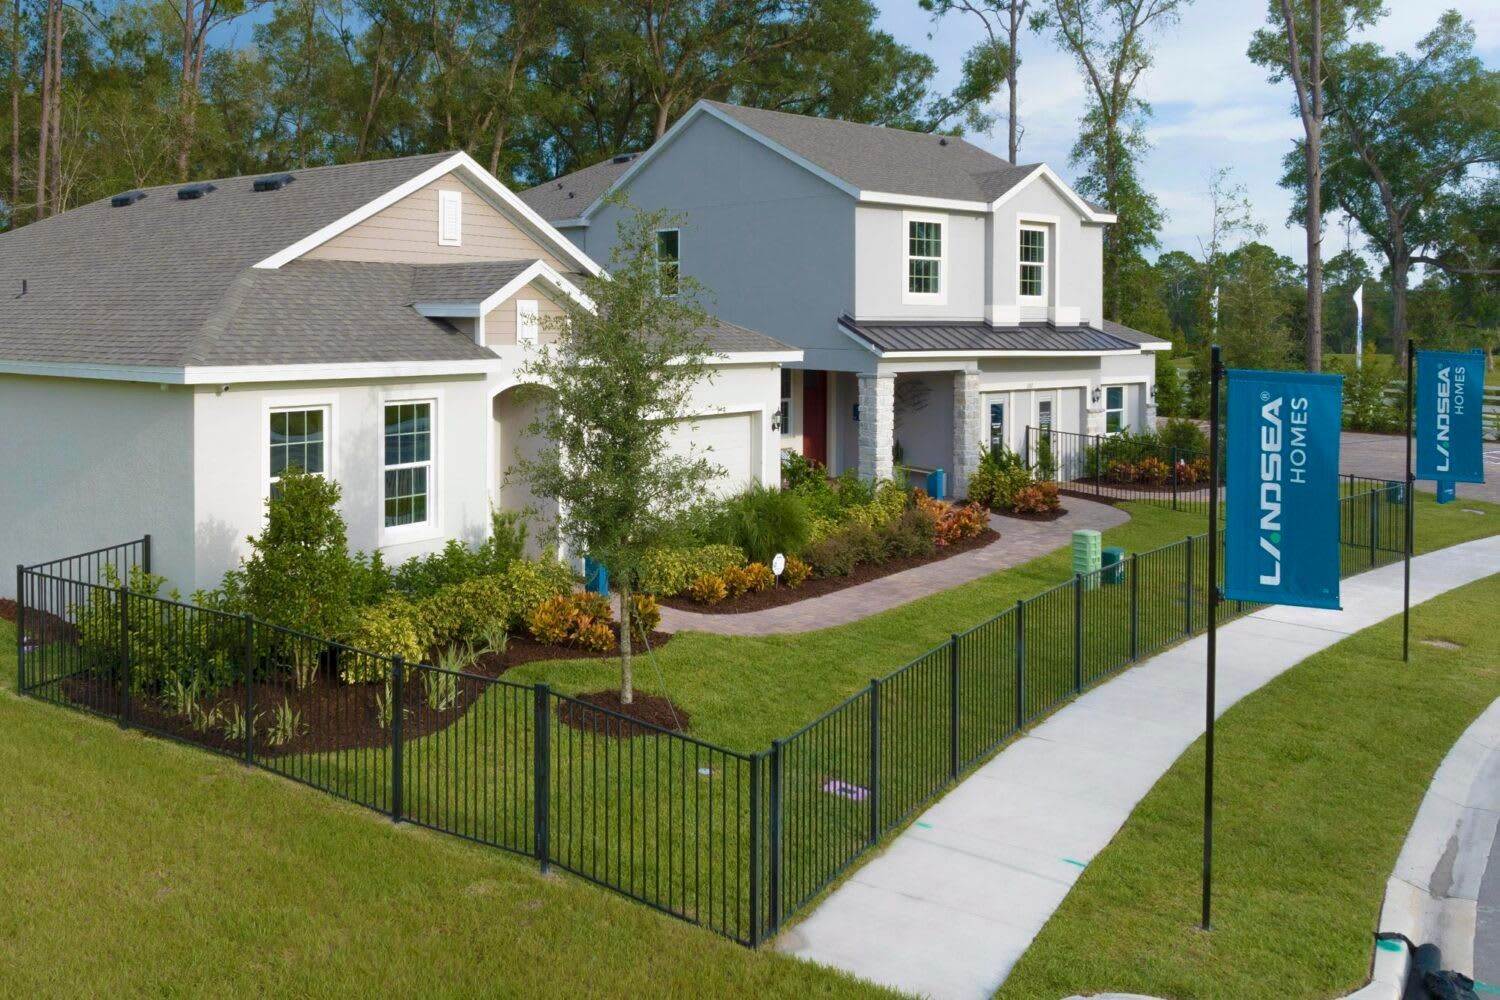 Beresford Woods building at 1107 Happy Forest Loop, Deland, FL 32720